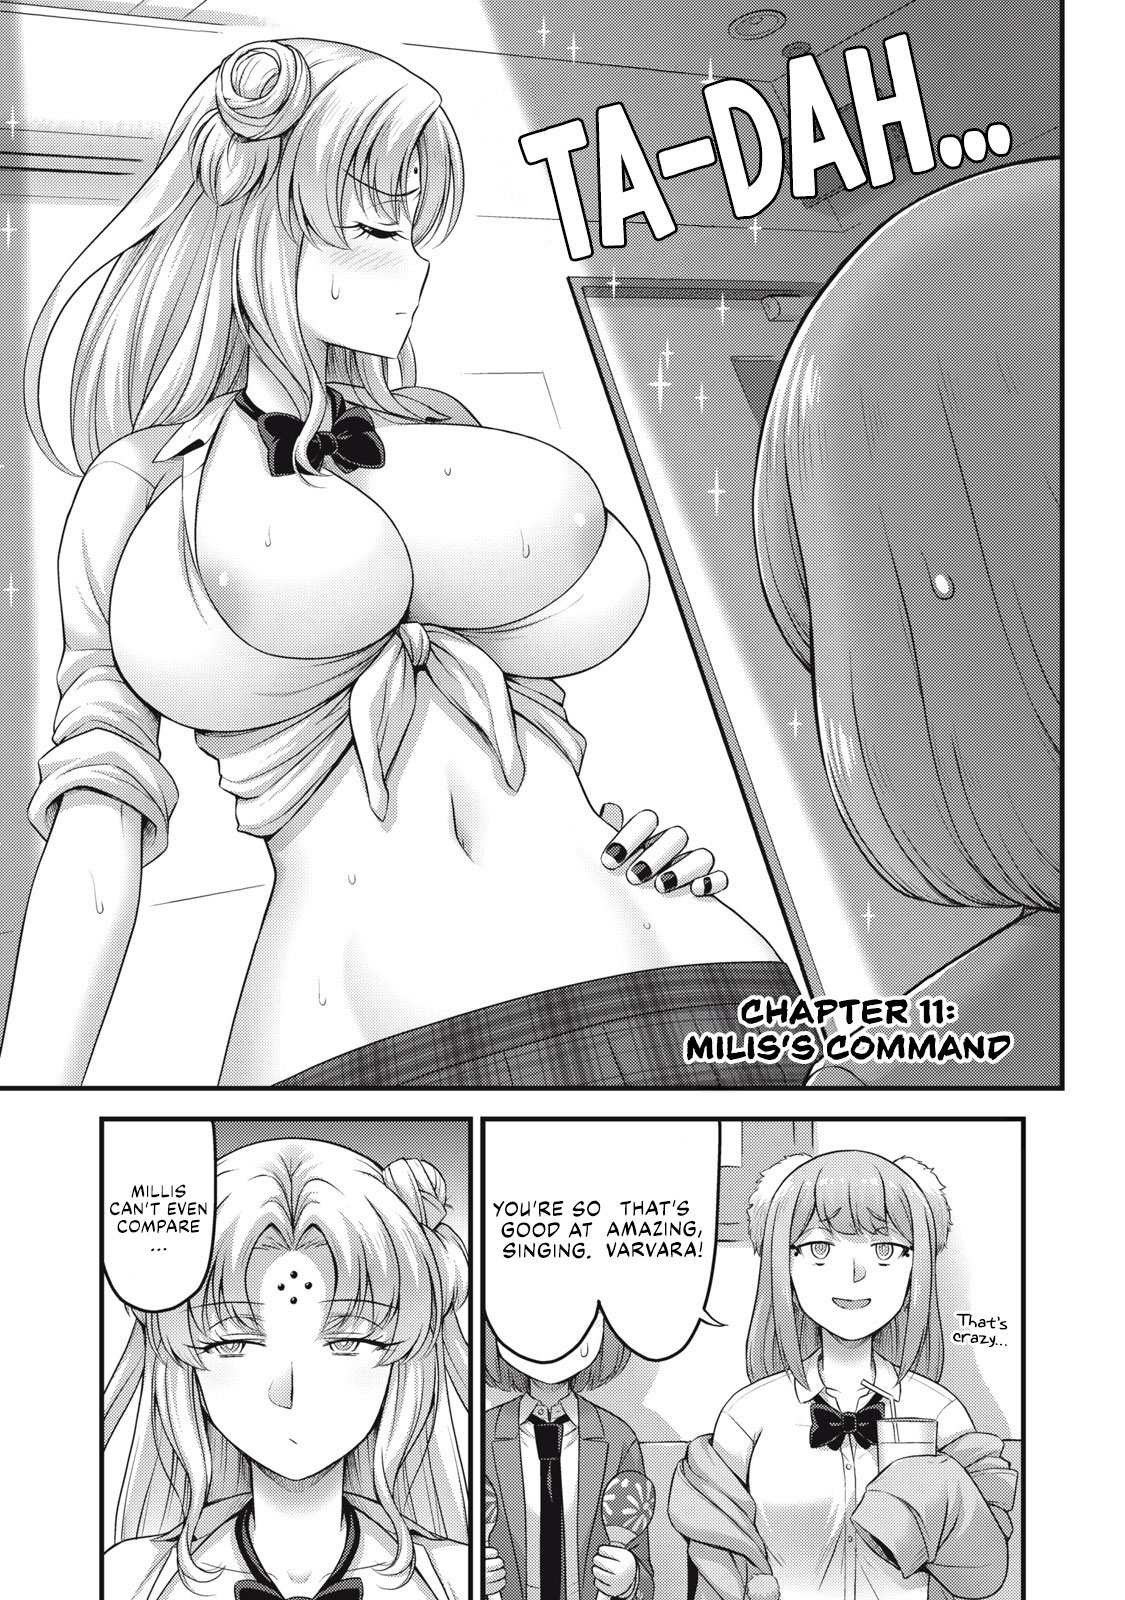 Queen's Seed Vol.2 Chapter 11: Milis’S Command - Picture 2